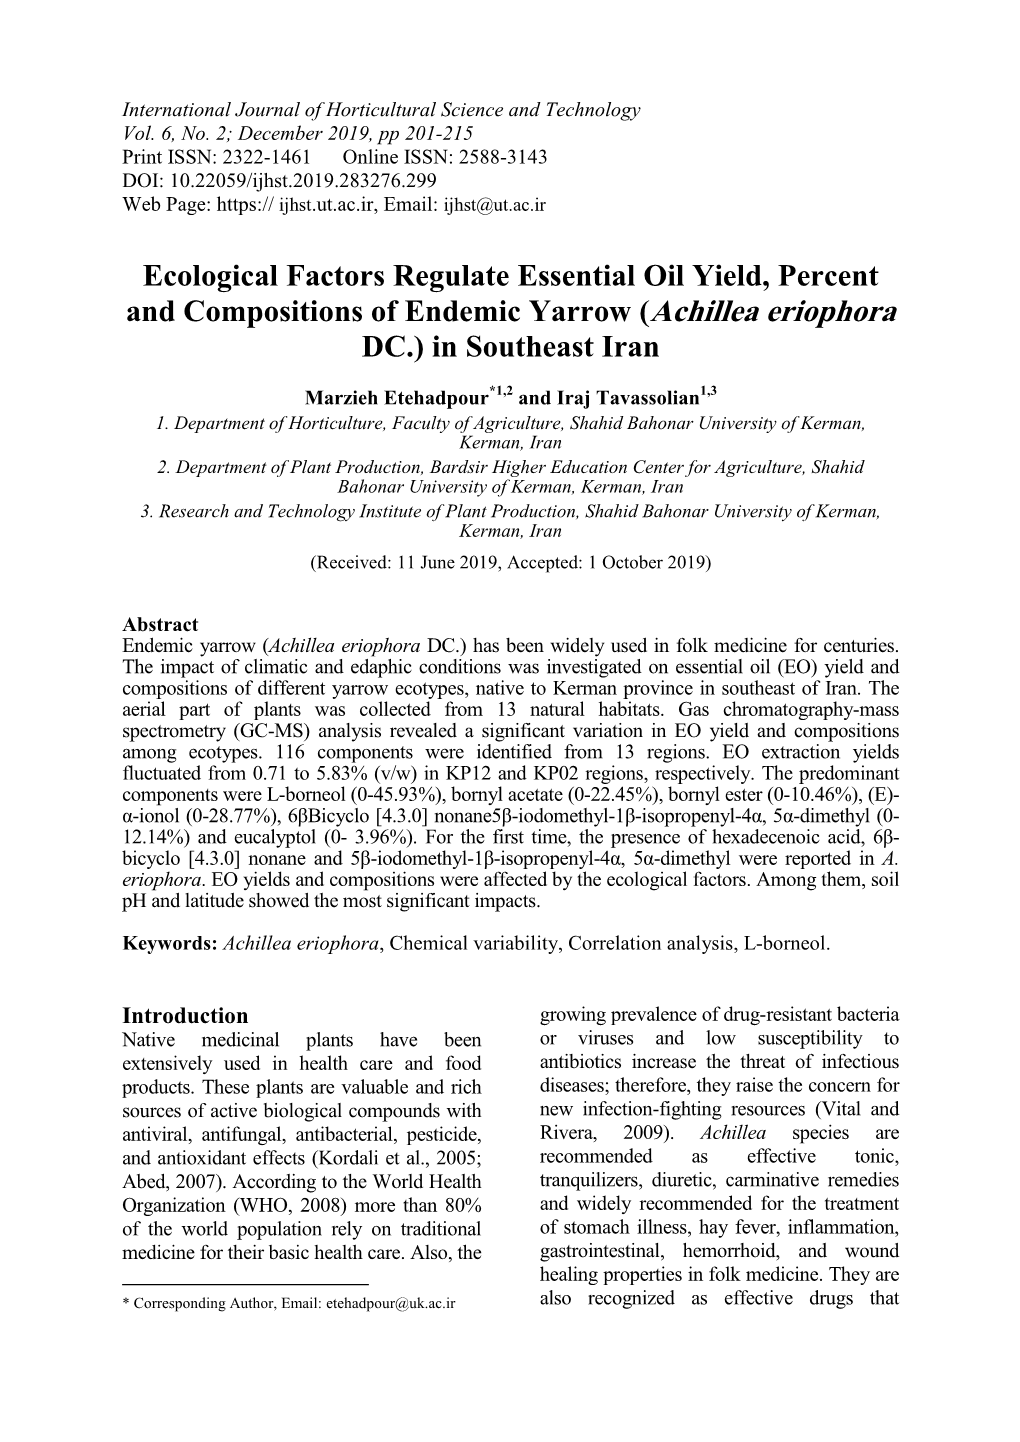 Ecological Factors Regulate Essential Oil Yield, Percent and Compositions of Endemic Yarrow (Achillea Eriophora DC.) in Southeast Iran